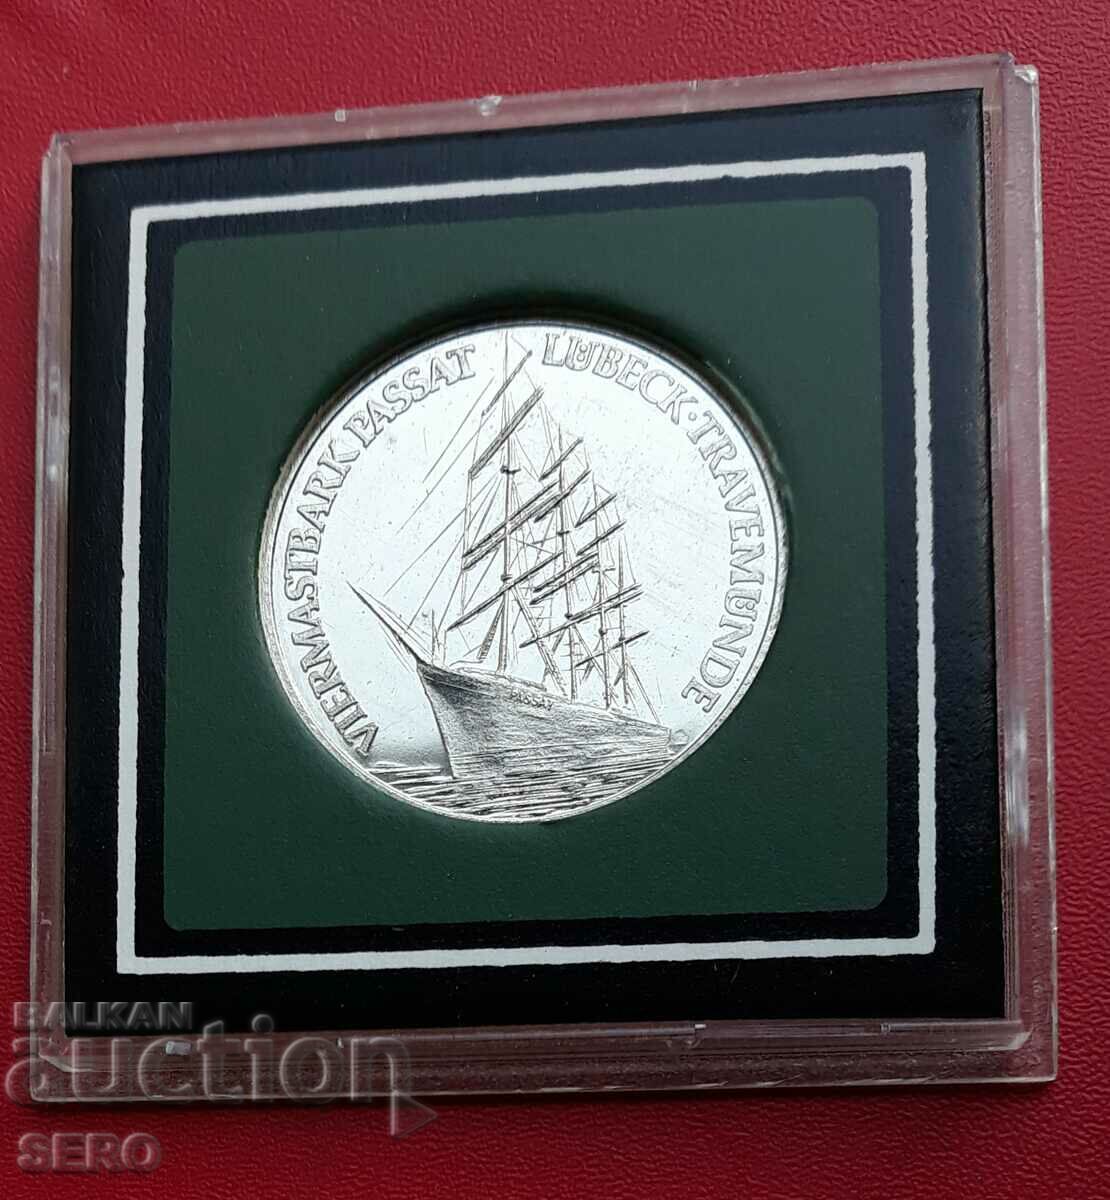 Germany-medal-four-masted sailing barque "Passat" 1911